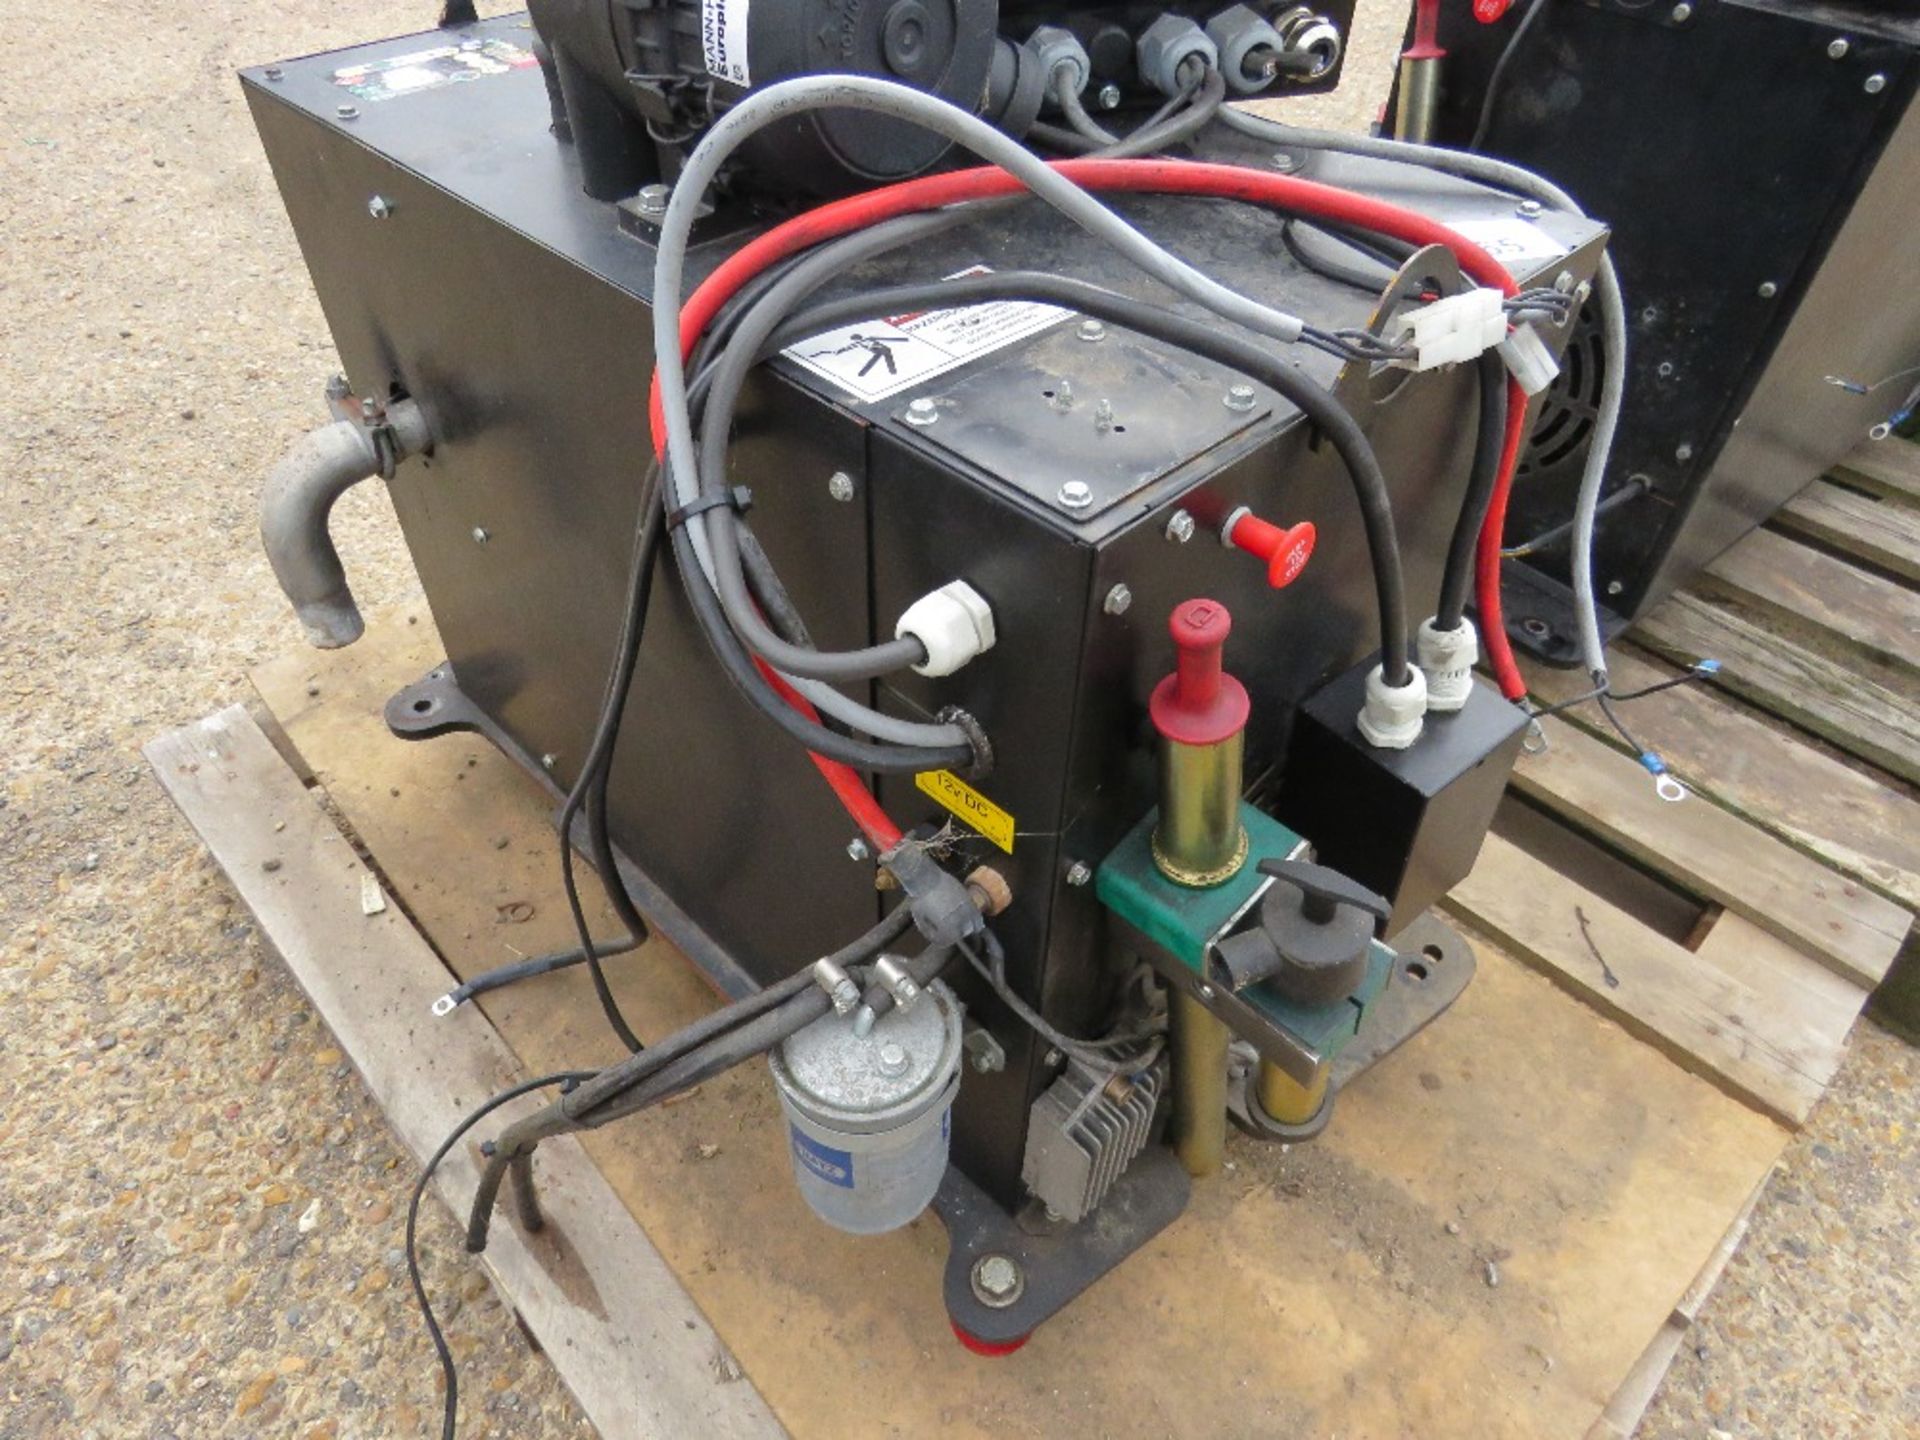 HATZ DIESEL ENGINED PACKAGED GENERATOR SET WITH CONTROL UNIT, 3.1KW RATED OUTPUT. - Image 4 of 6